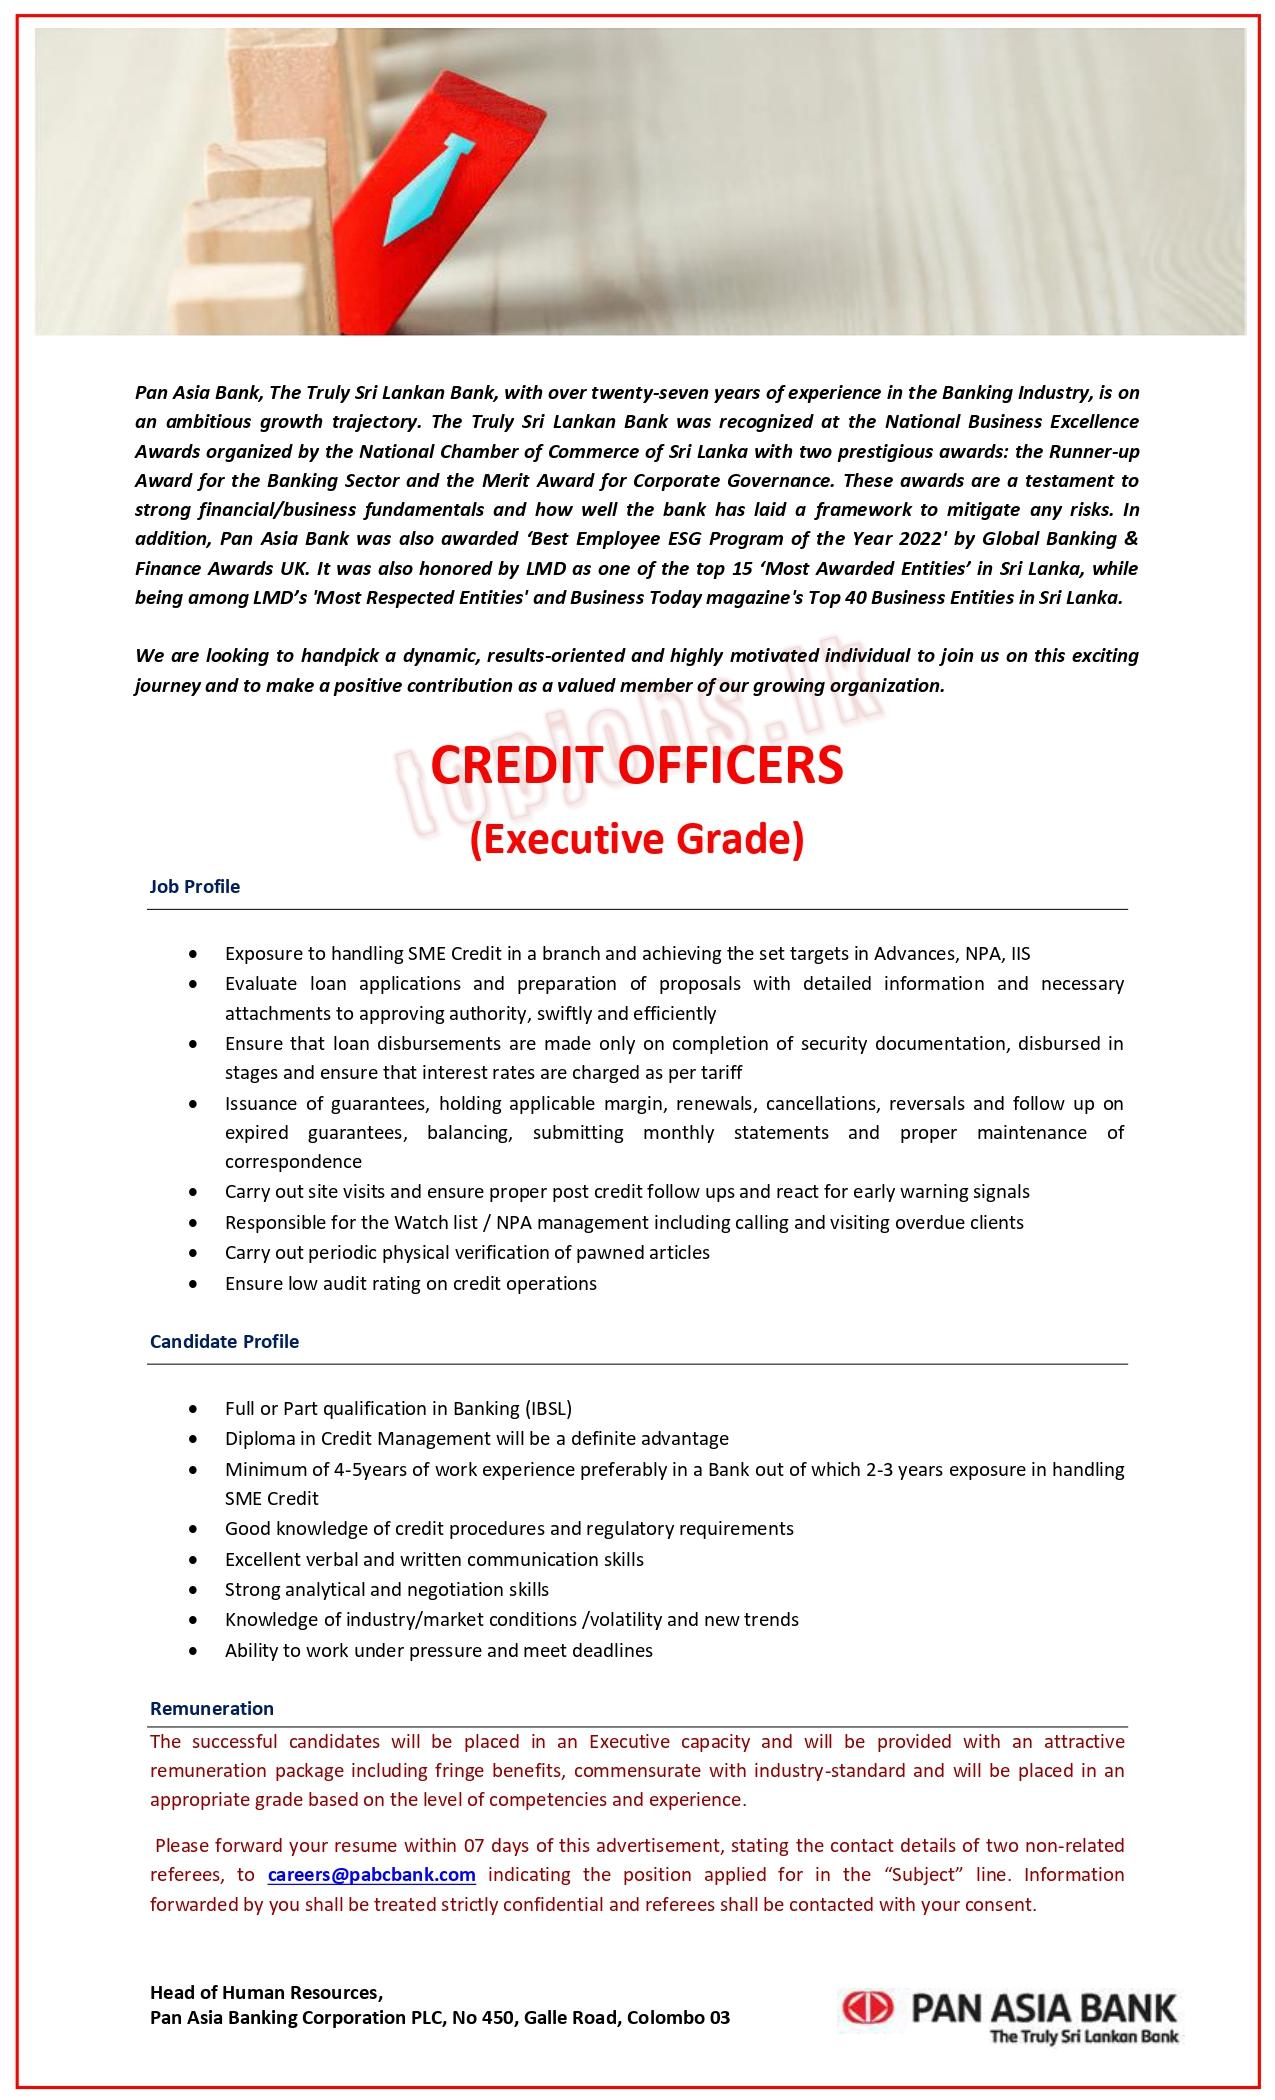 Credit Officers (Executive Grade)